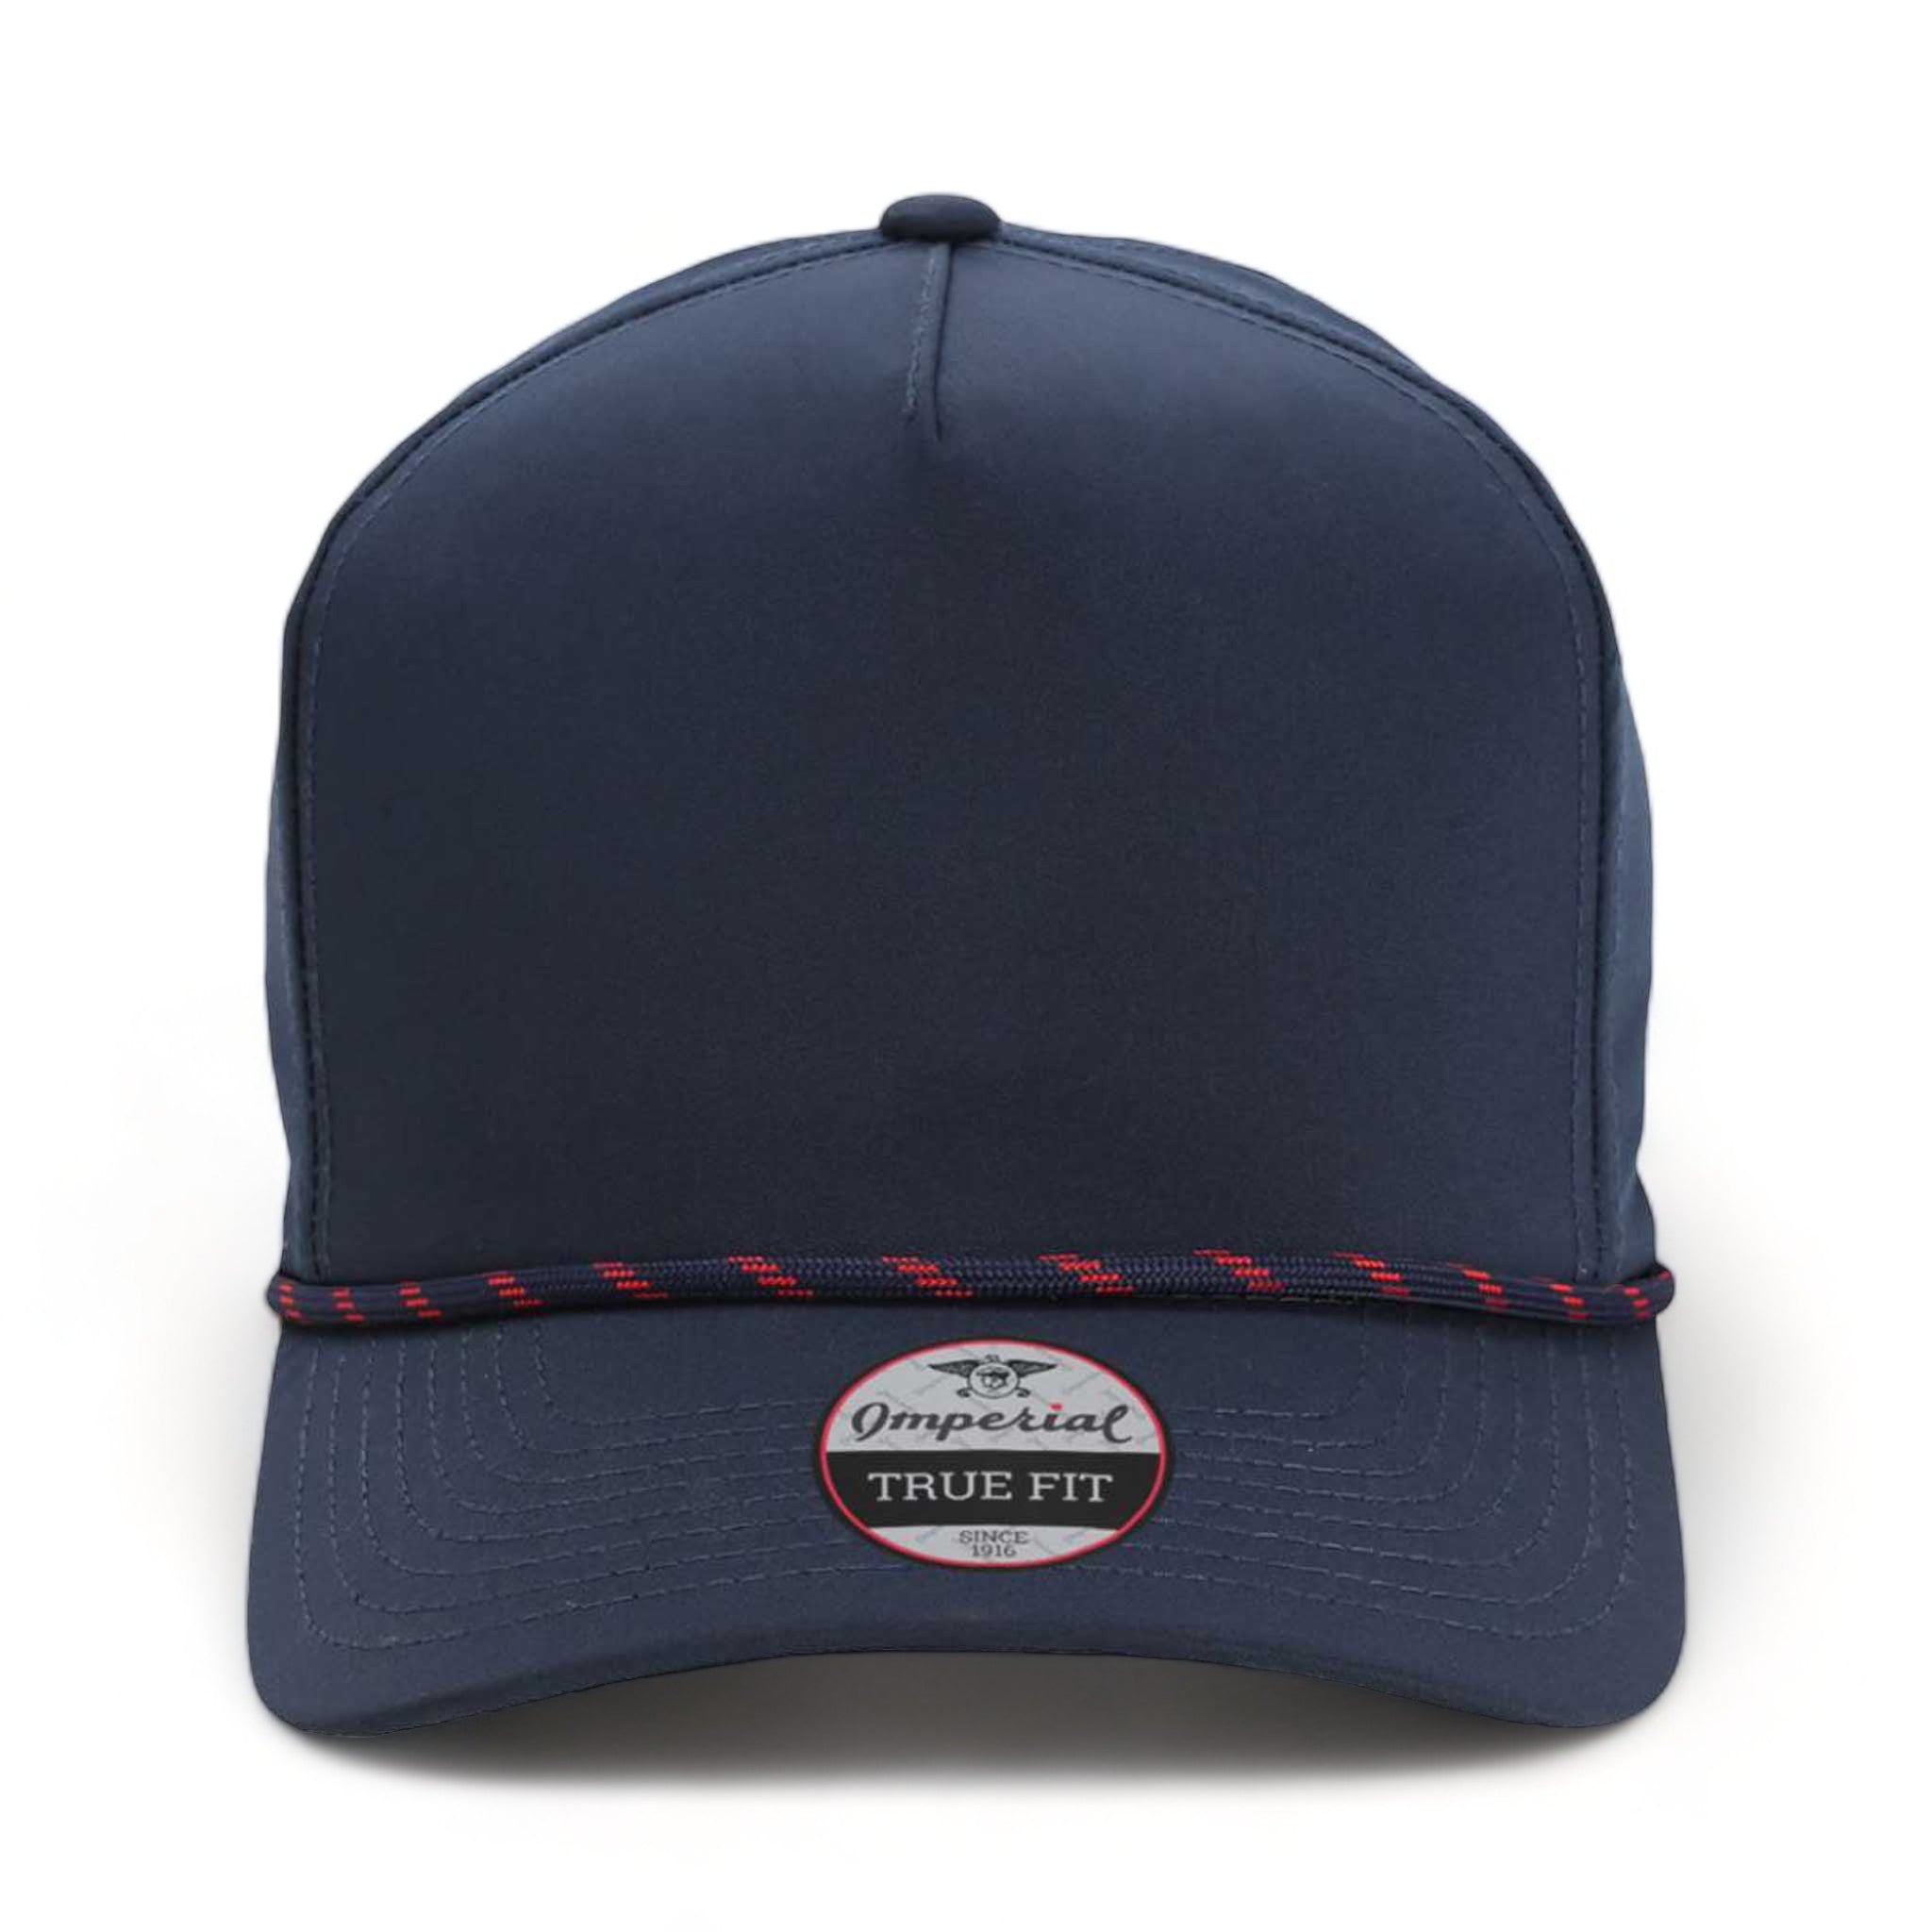 Front view of Imperial 5054 custom hat in navy and navy-red